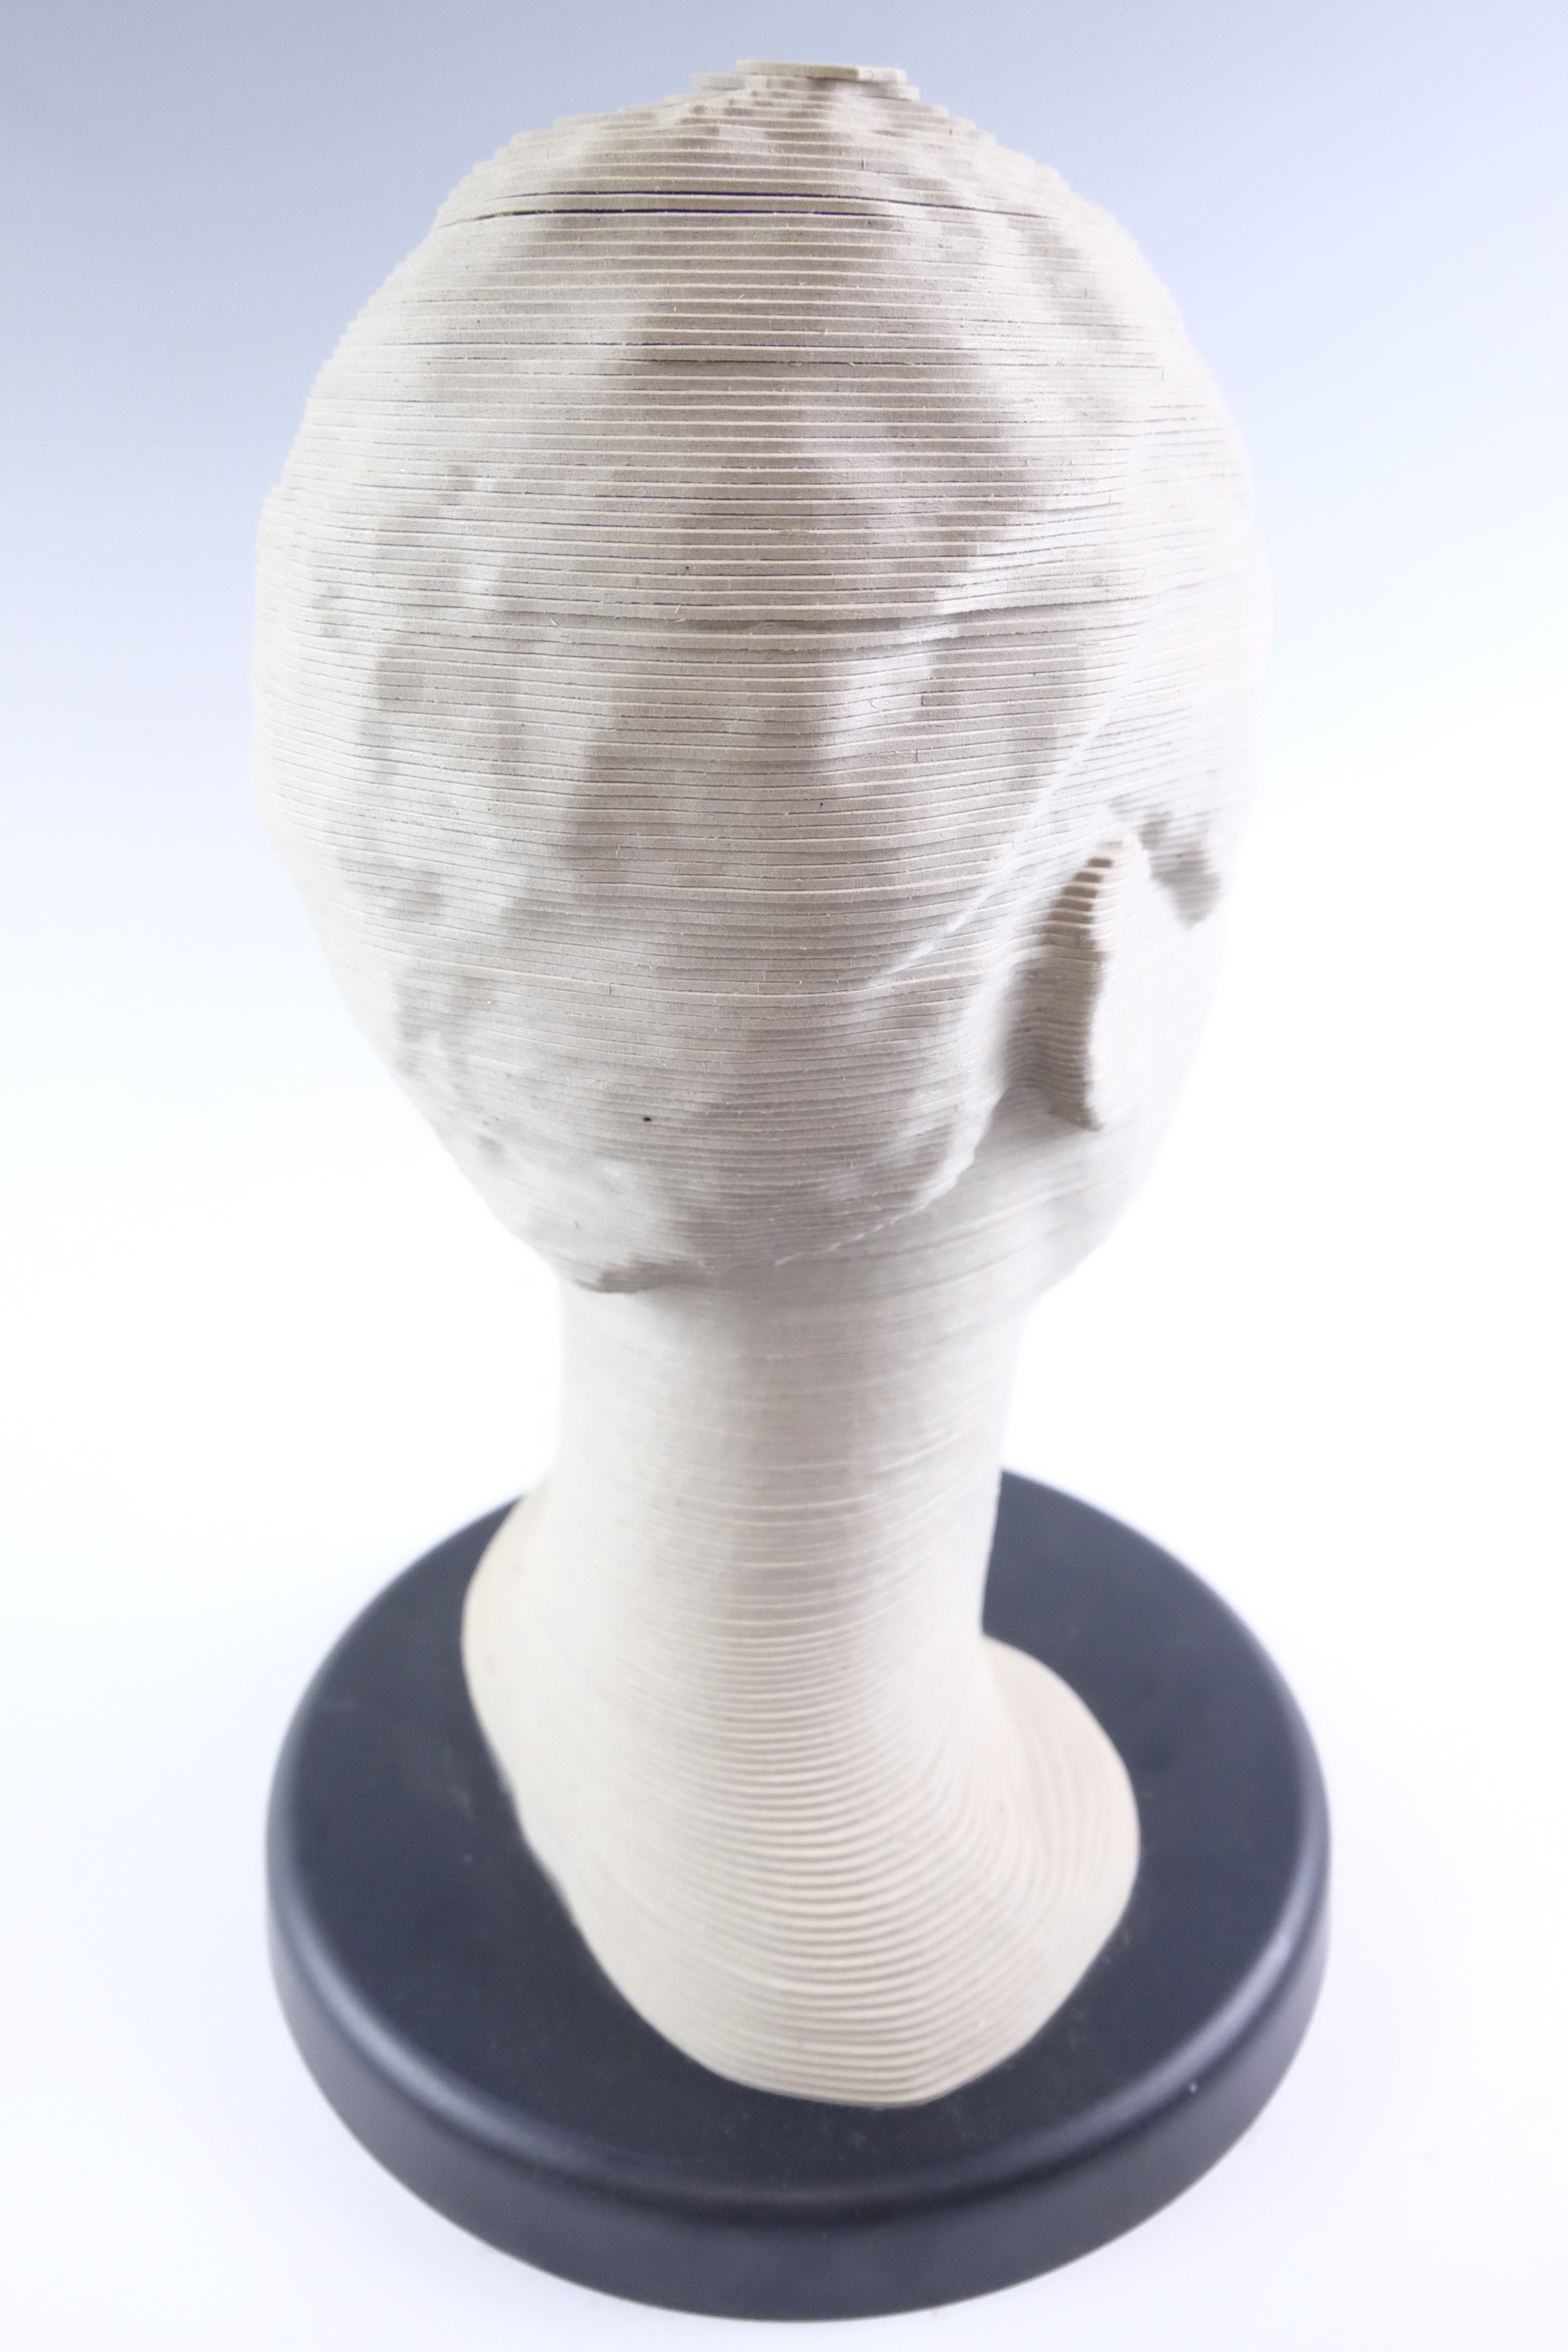 A life-sized female bust modelled using lamellae of profiled card, 37 cm - Image 3 of 3